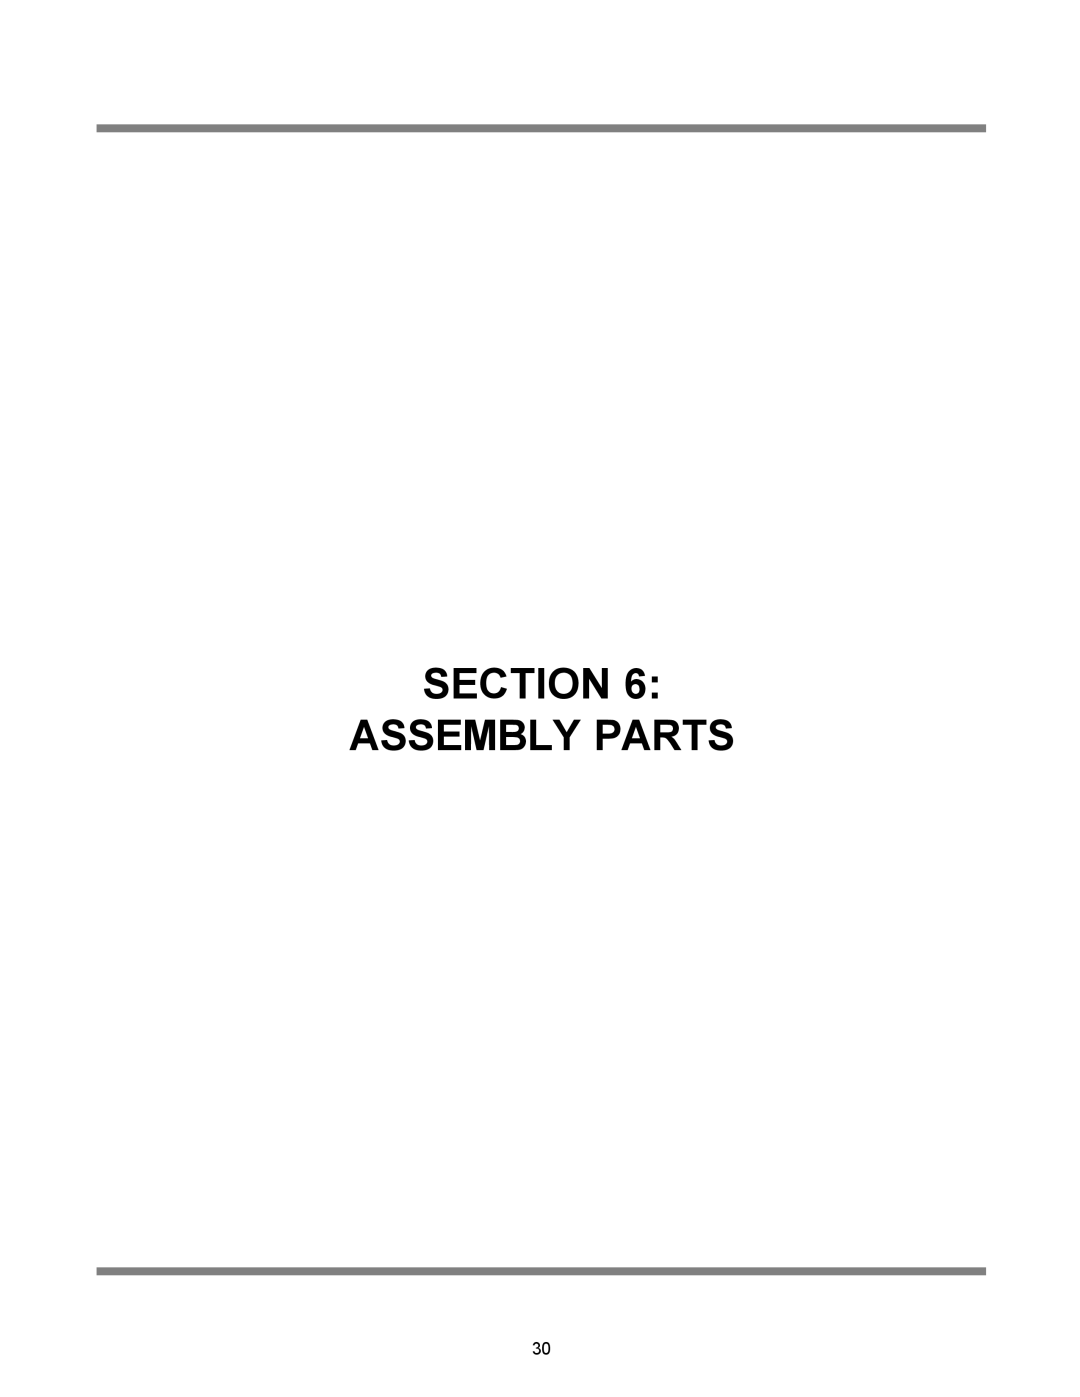 Jackson 10APRB, dishmachines, 10AB, 10U technical manual Section Assembly Parts 